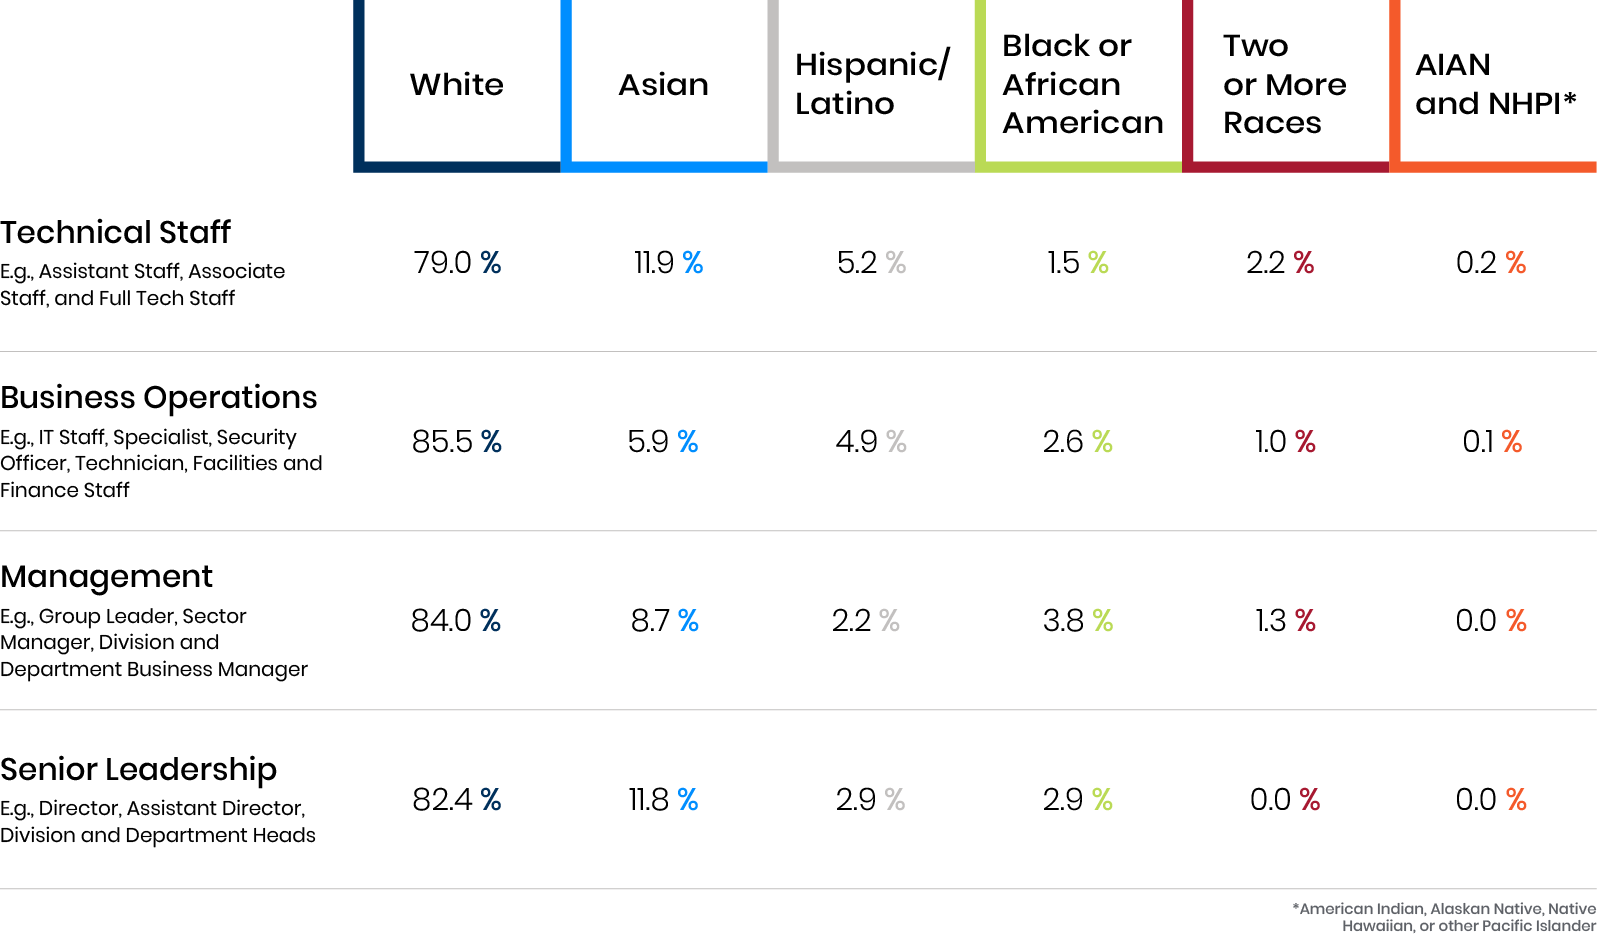 Table breakdown of career level by race and ethnicity.